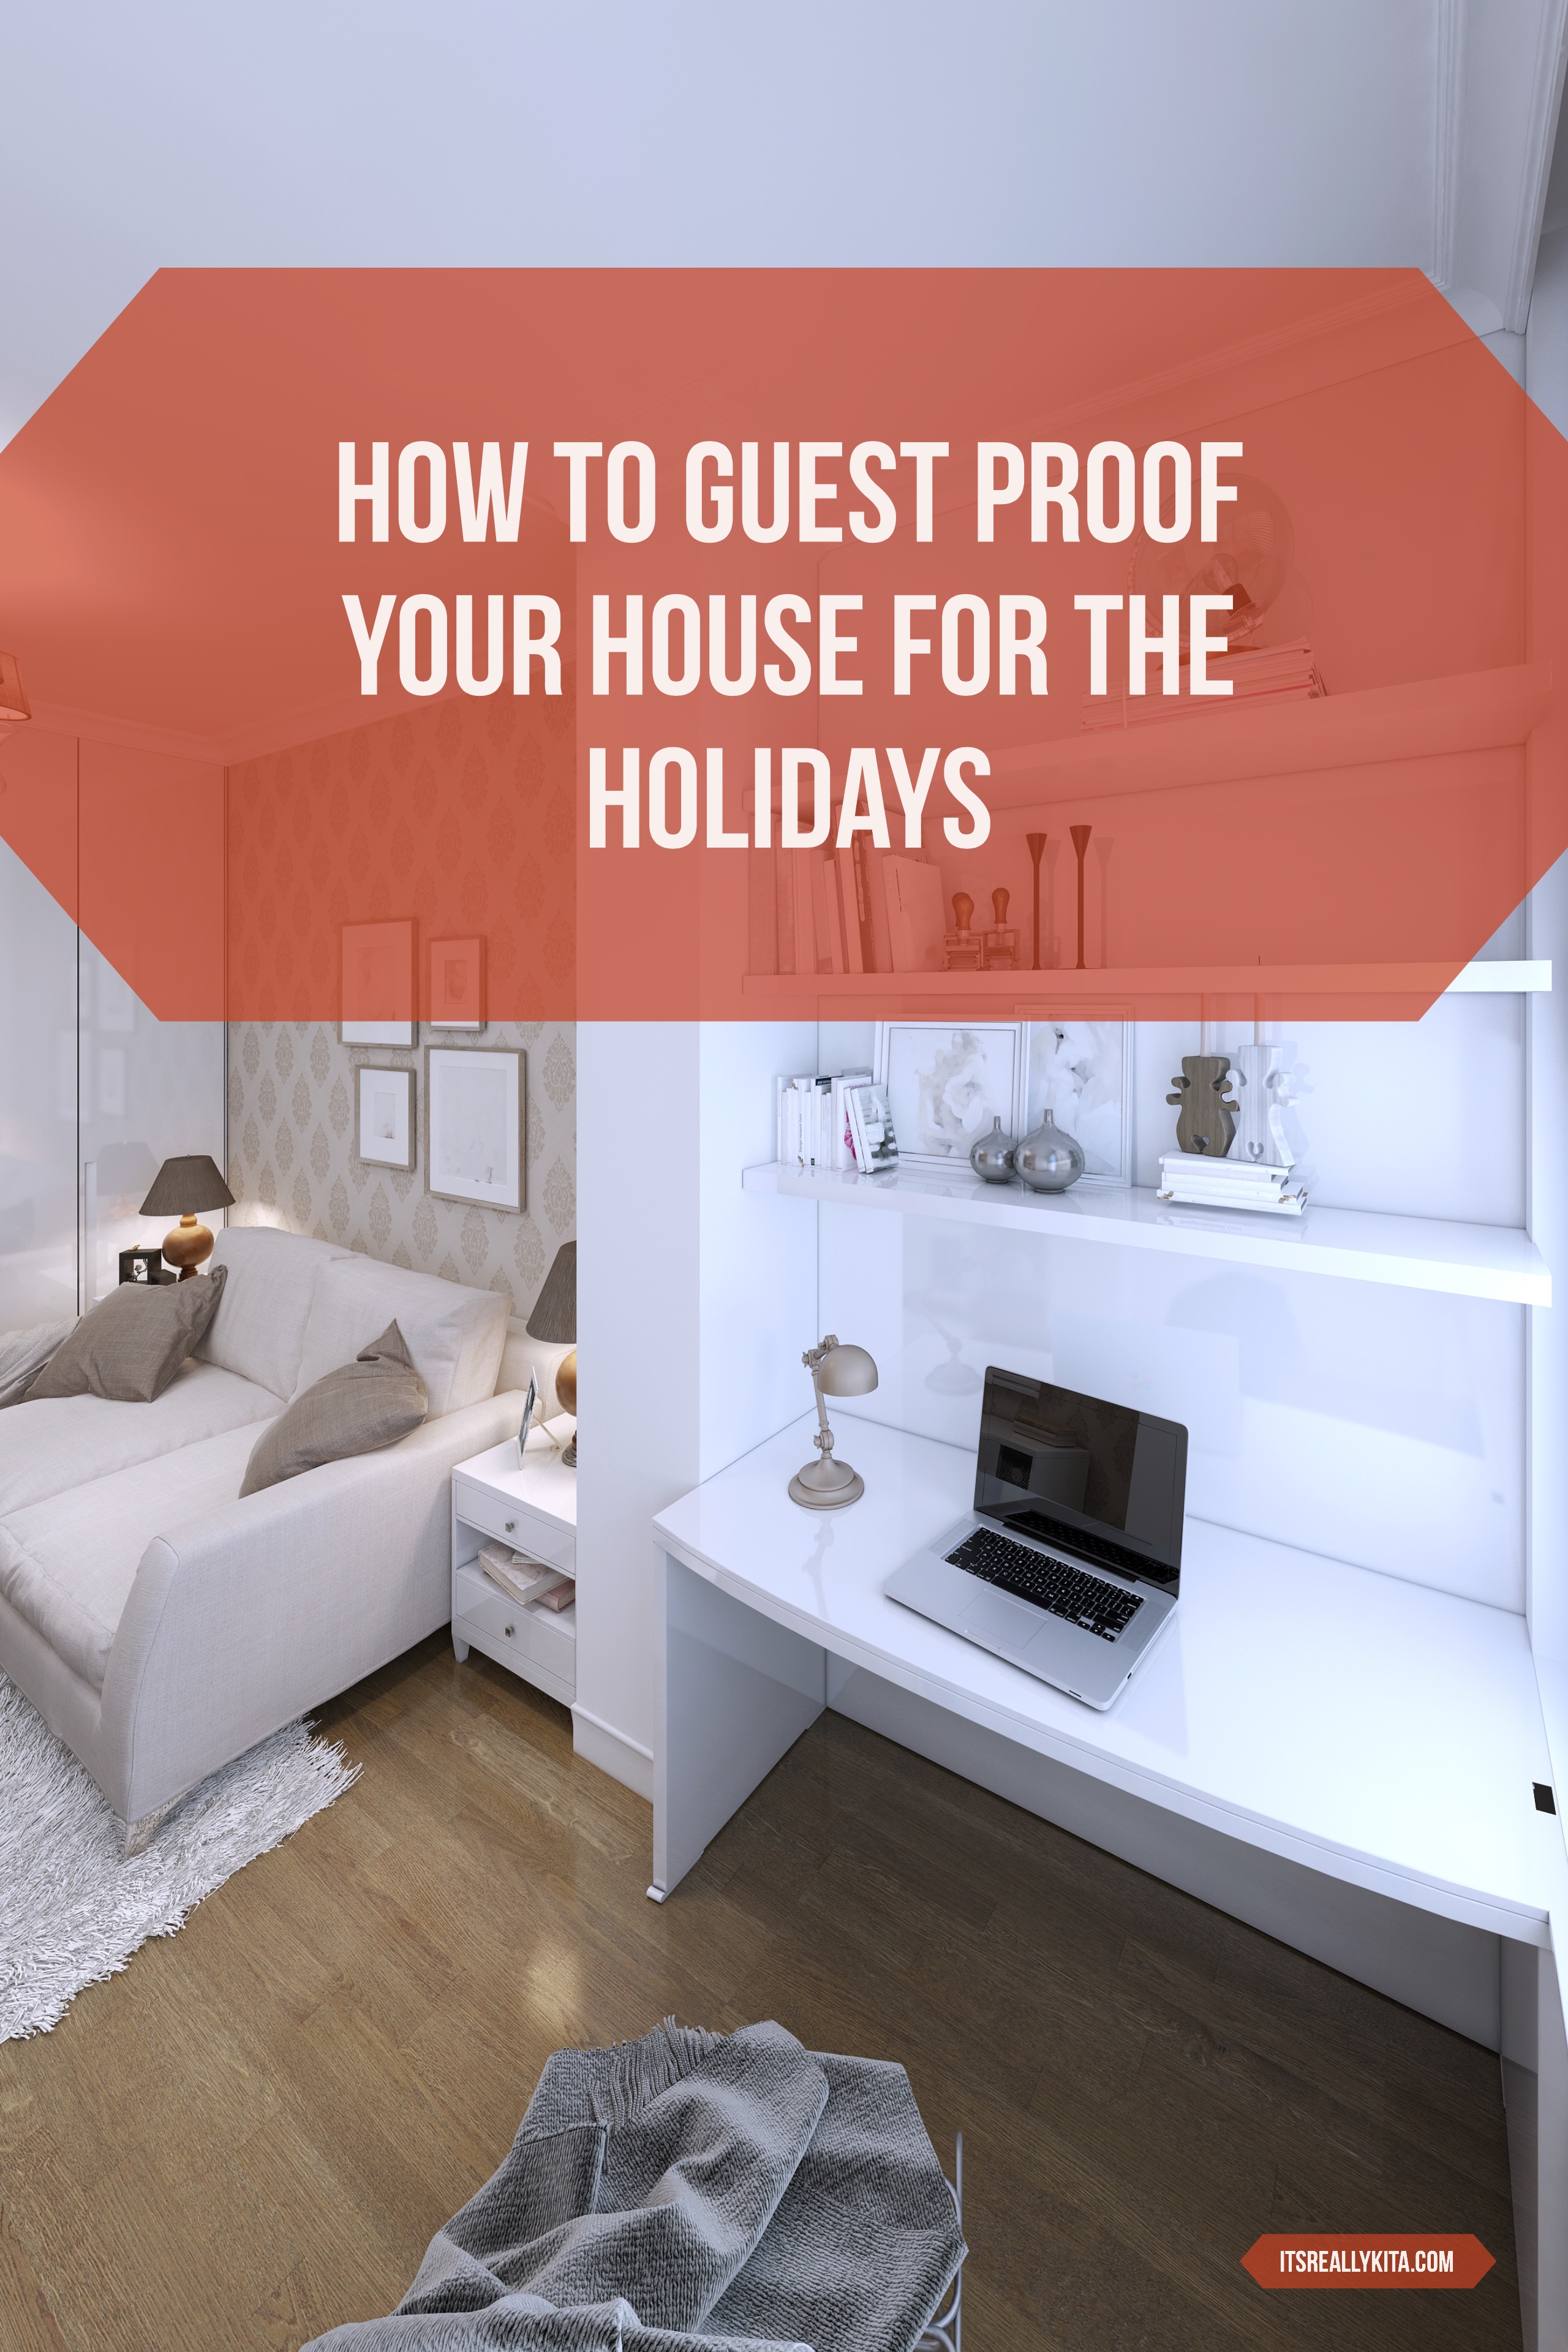 How to guest proof your house for the holidays